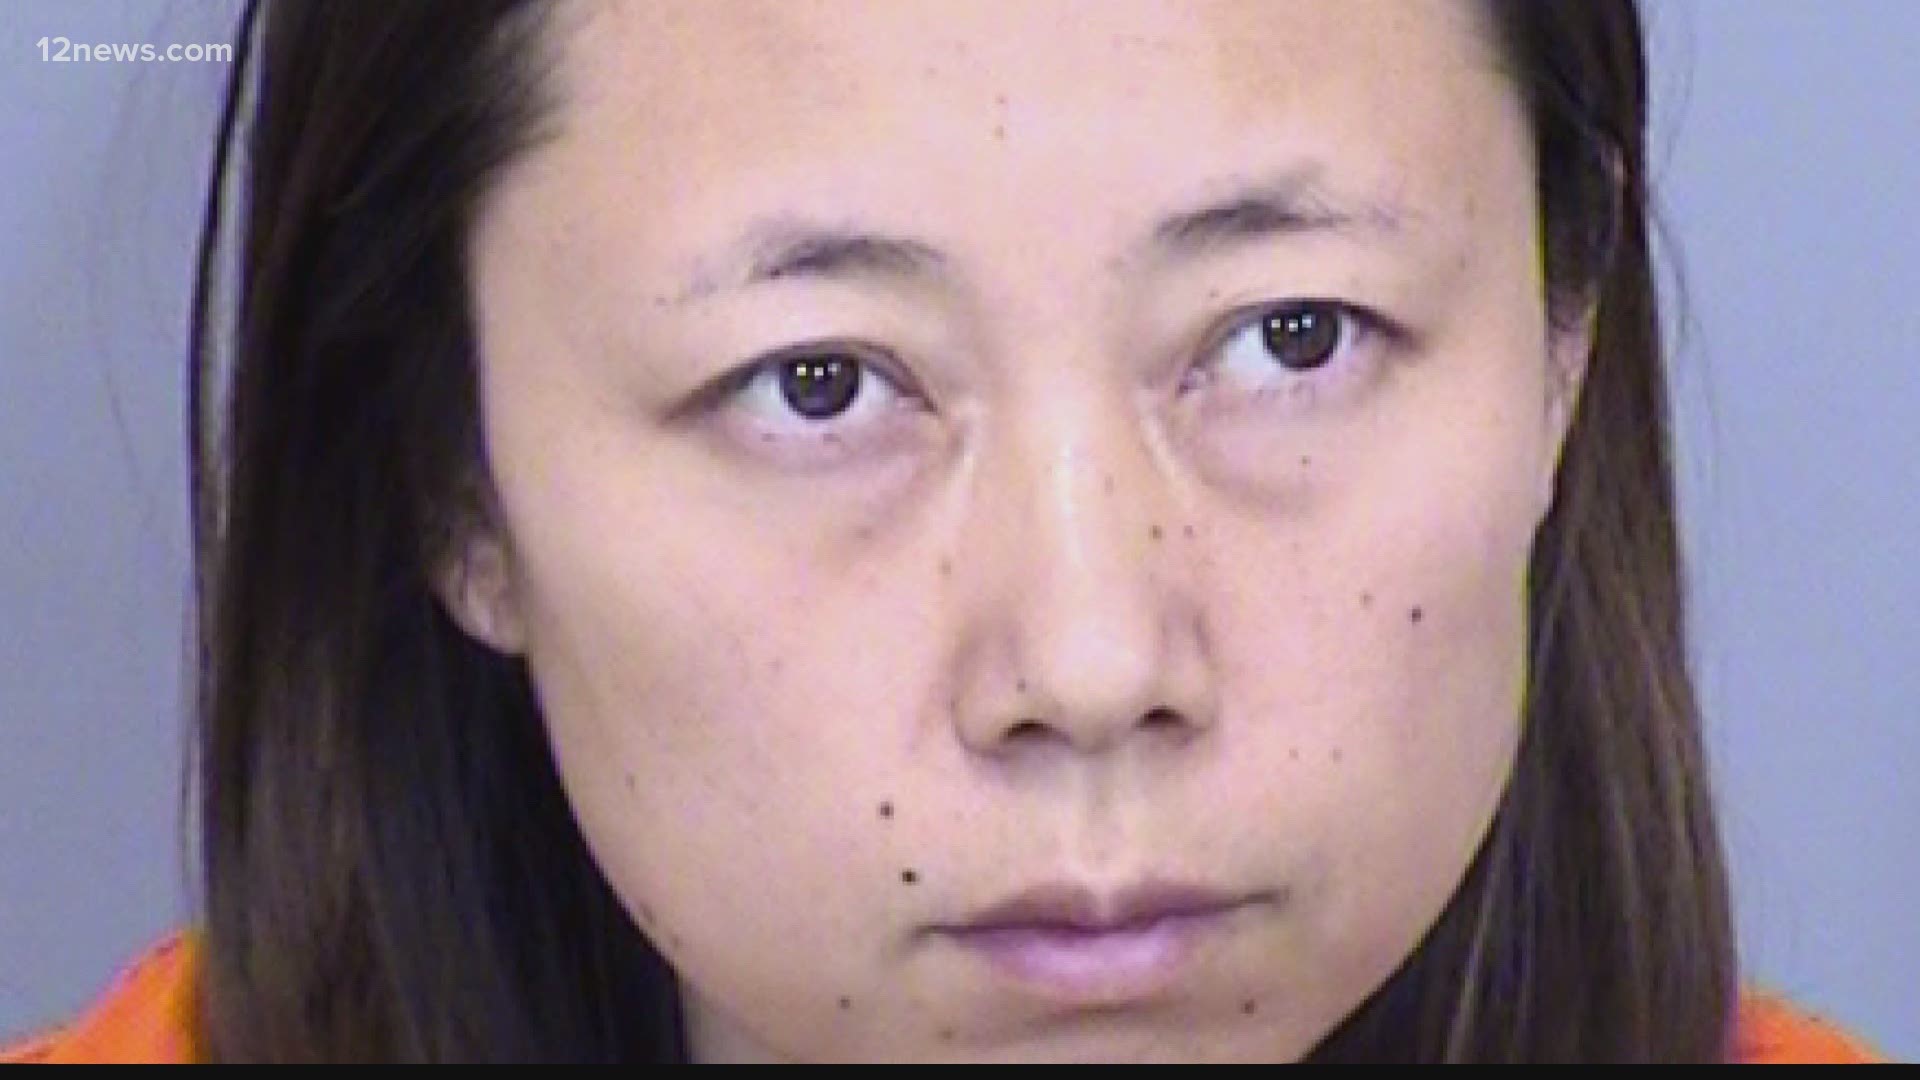 Two young children, 9 and 7, were allegedly killed by the mother, Yui Inoue, in Tempe over the weekend. Court records show Inoue has a history of violence.